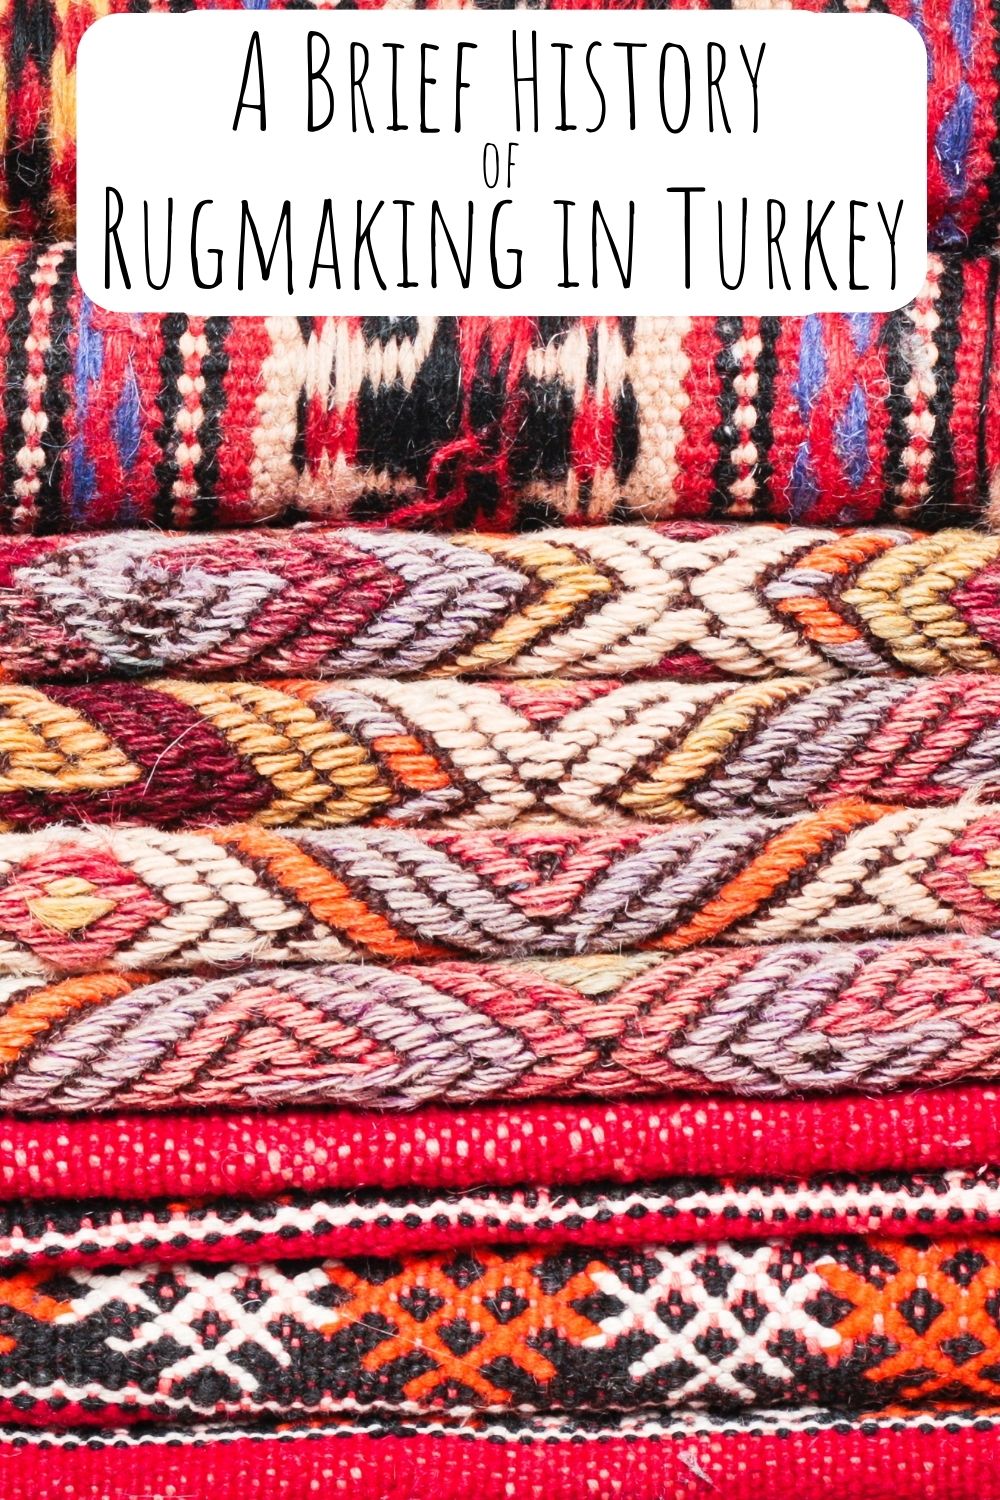 Turkish fashion: From the heart of Central Asia to Anatolia